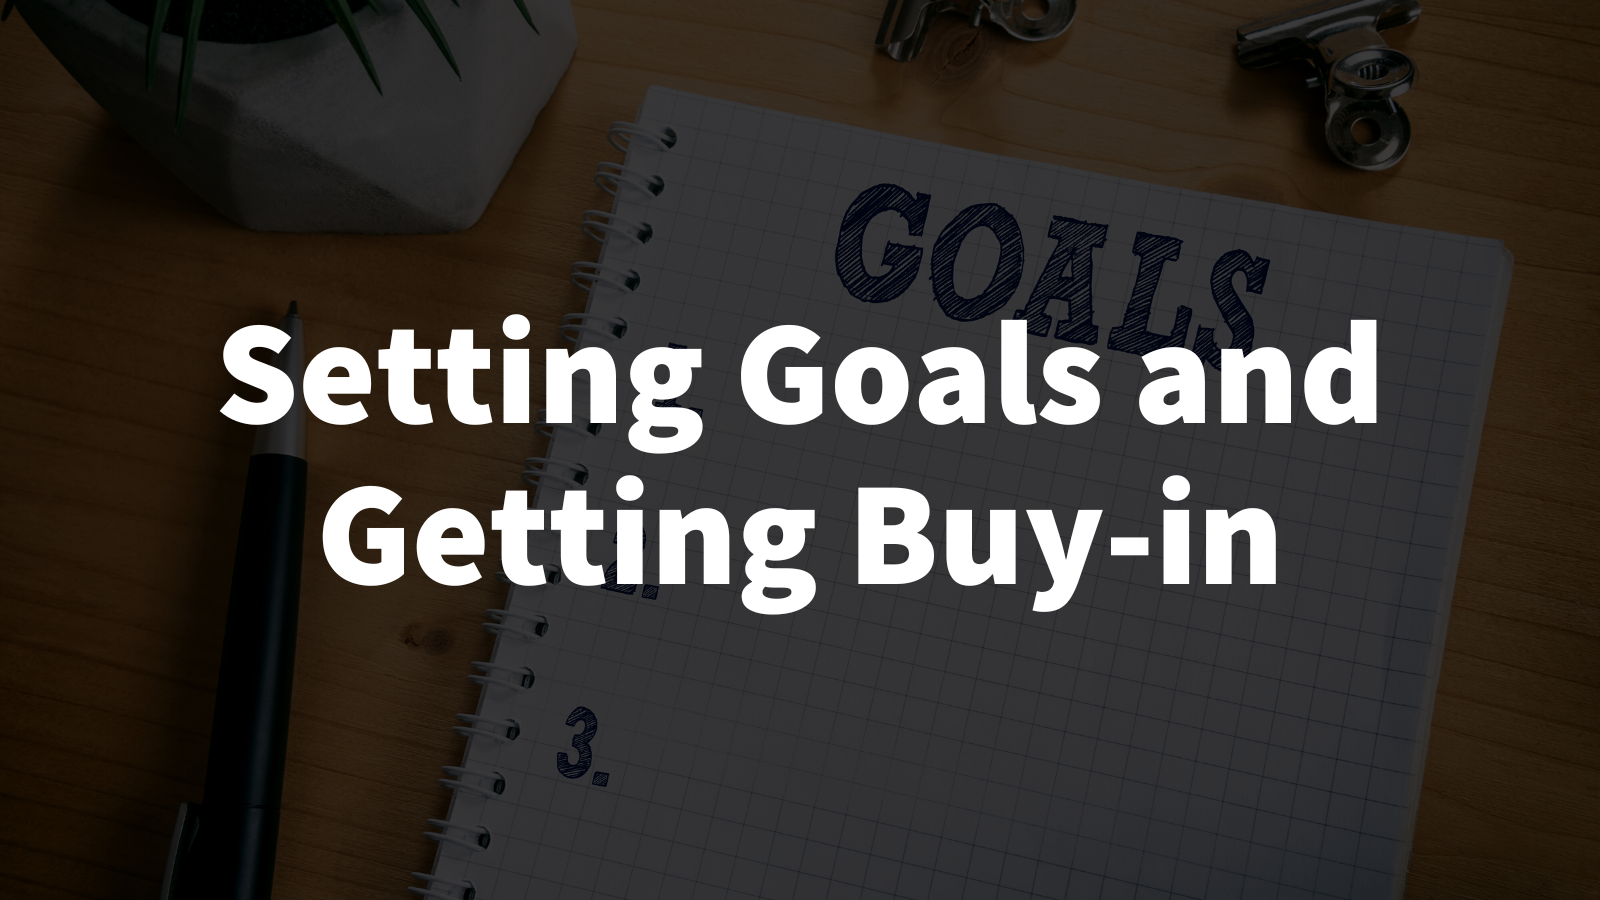 Startup Leadership: Setting Goals and Getting Buy-in